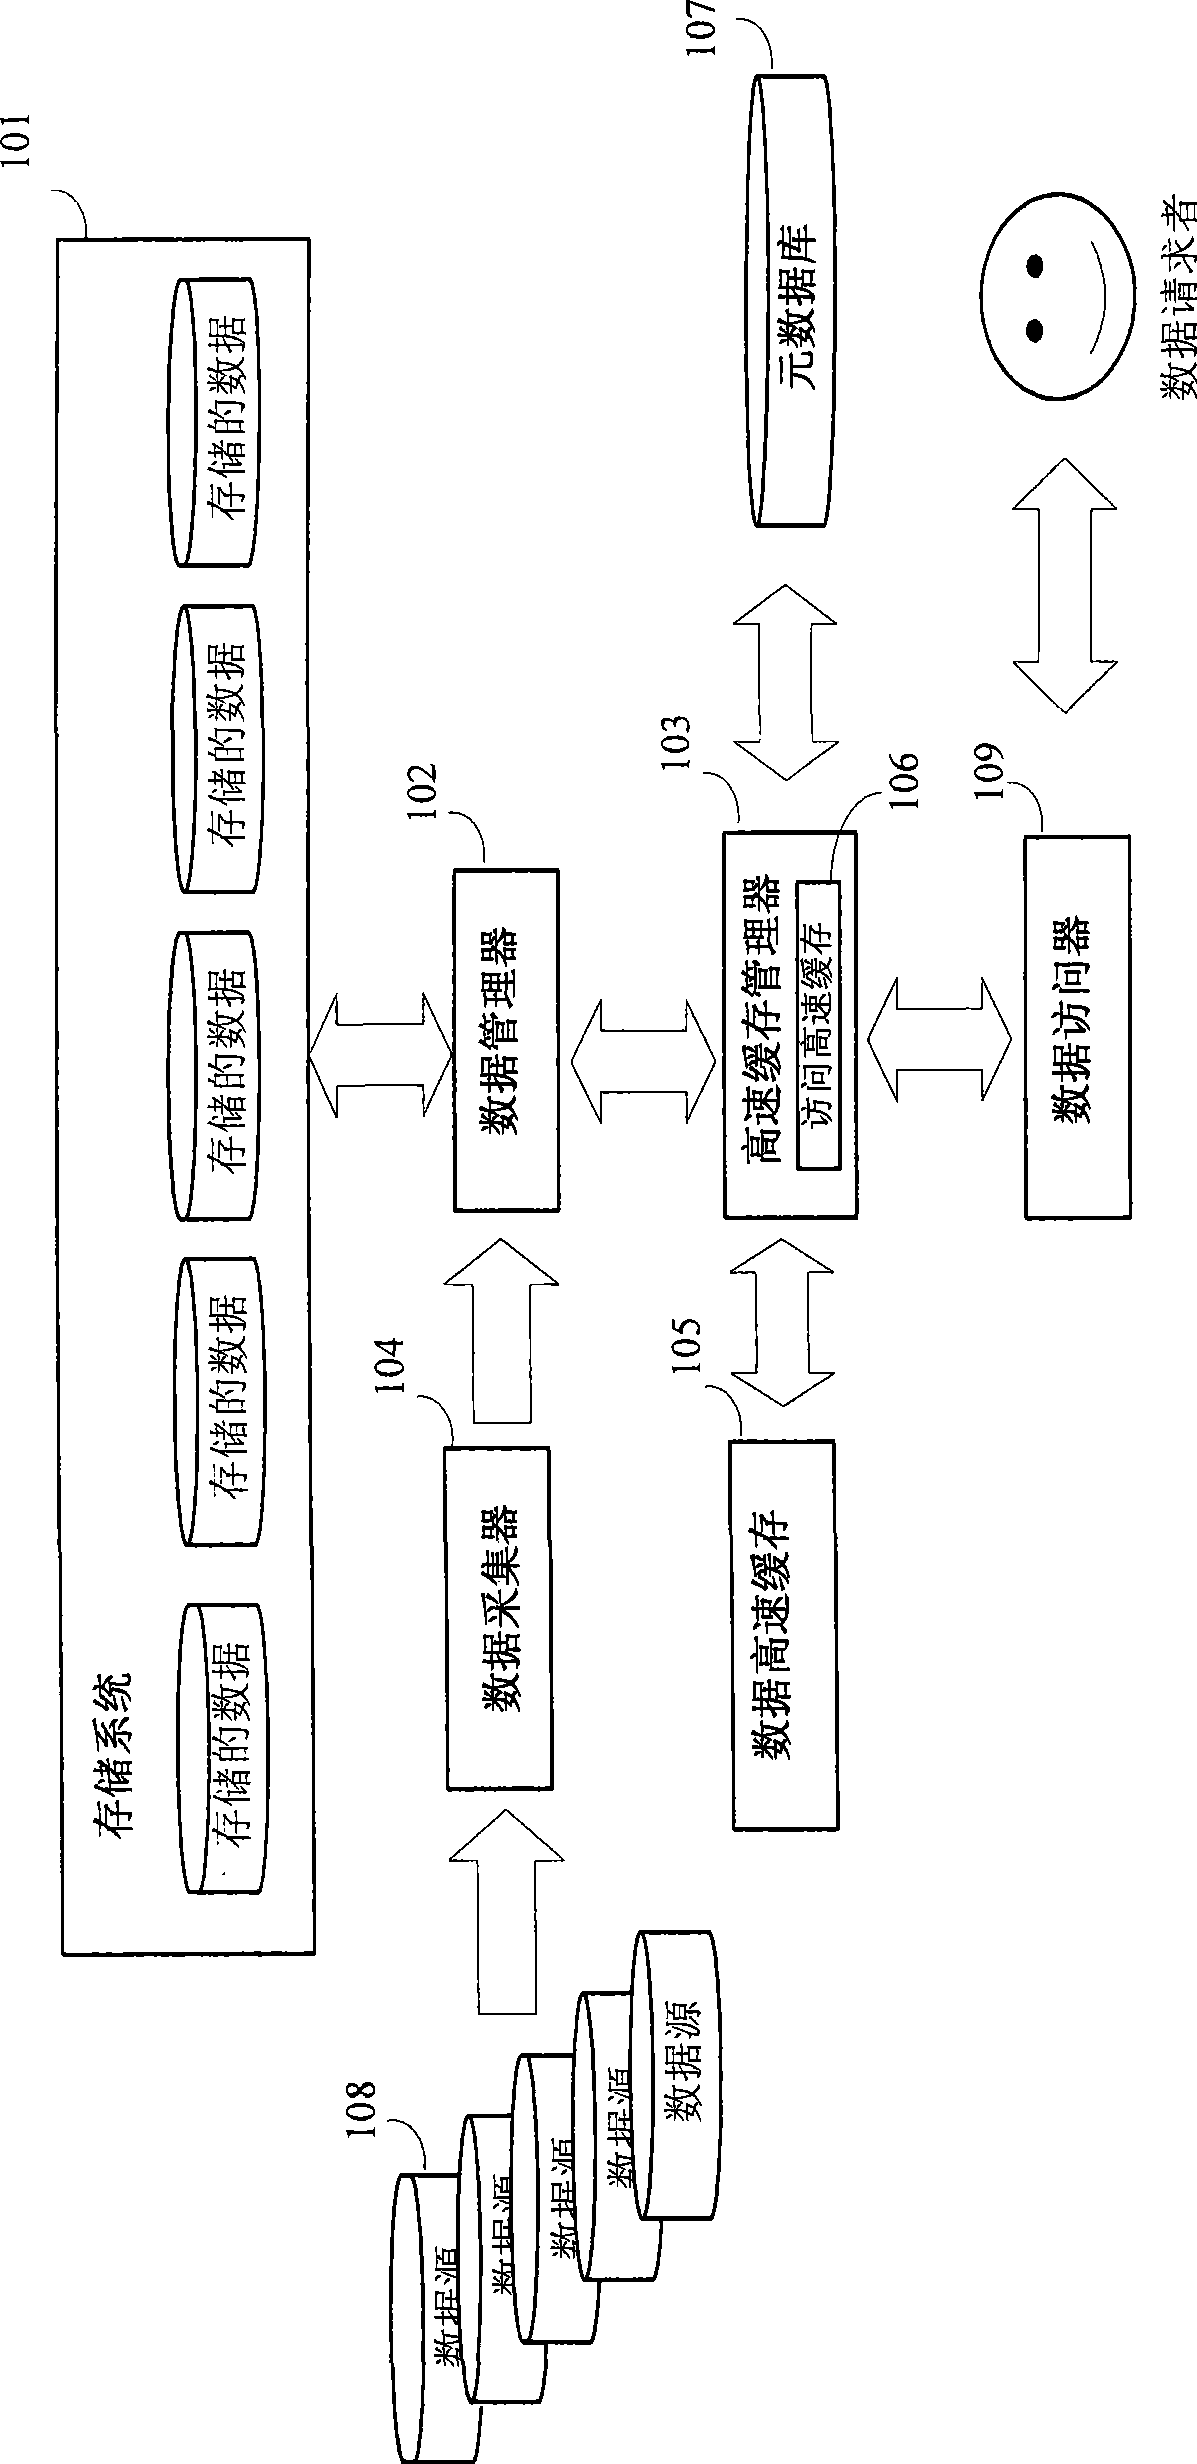 Continuous storage data storing and managing method and system based on access frequency